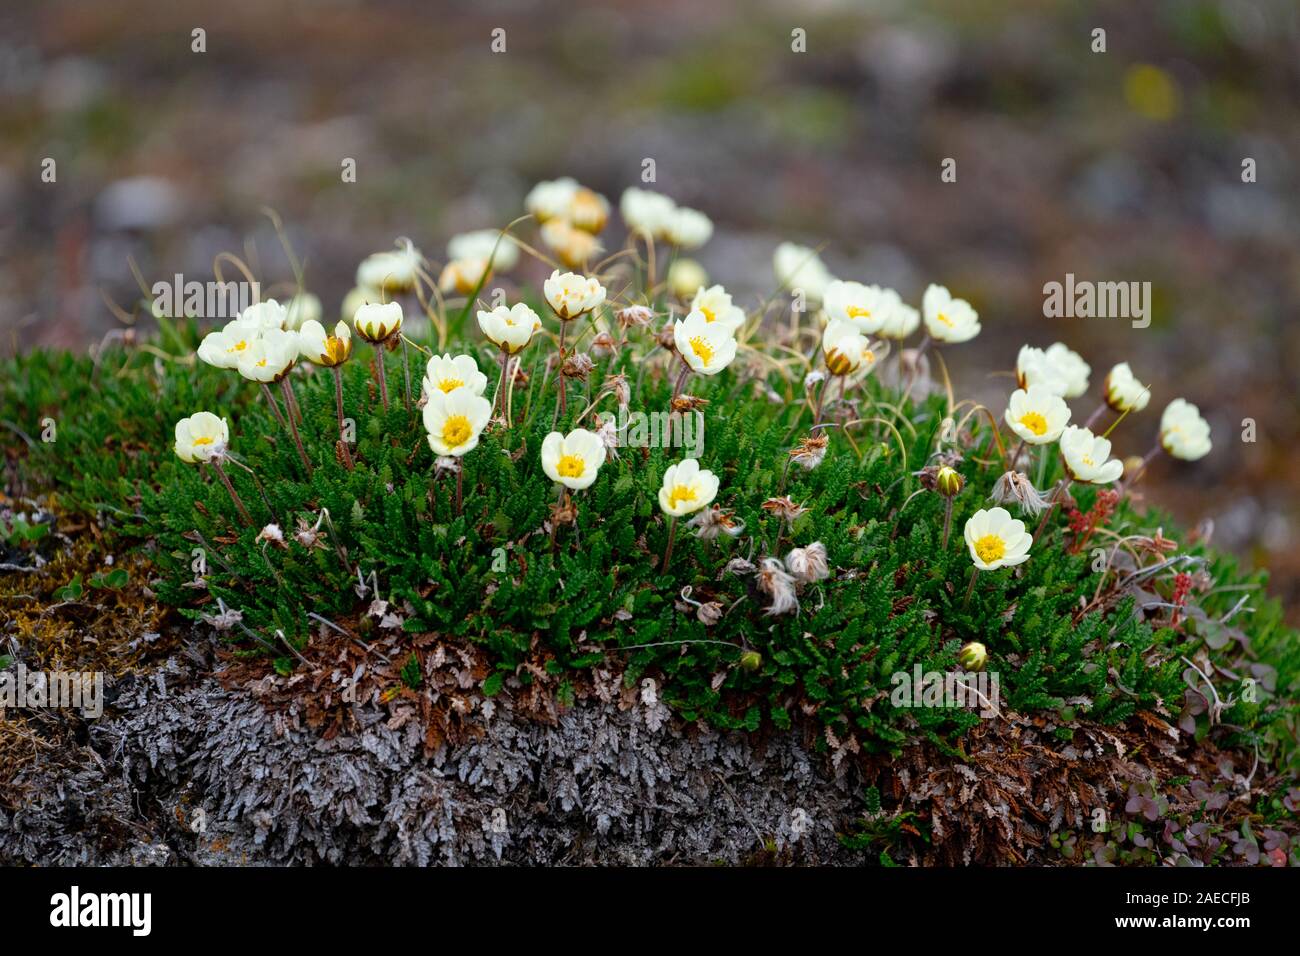 Saxifraga cespitosa, the tufted alpine saxifrage or tufted saxifrage, is a flower common to many arctic heights. It appears further south in mountaino Stock Photo